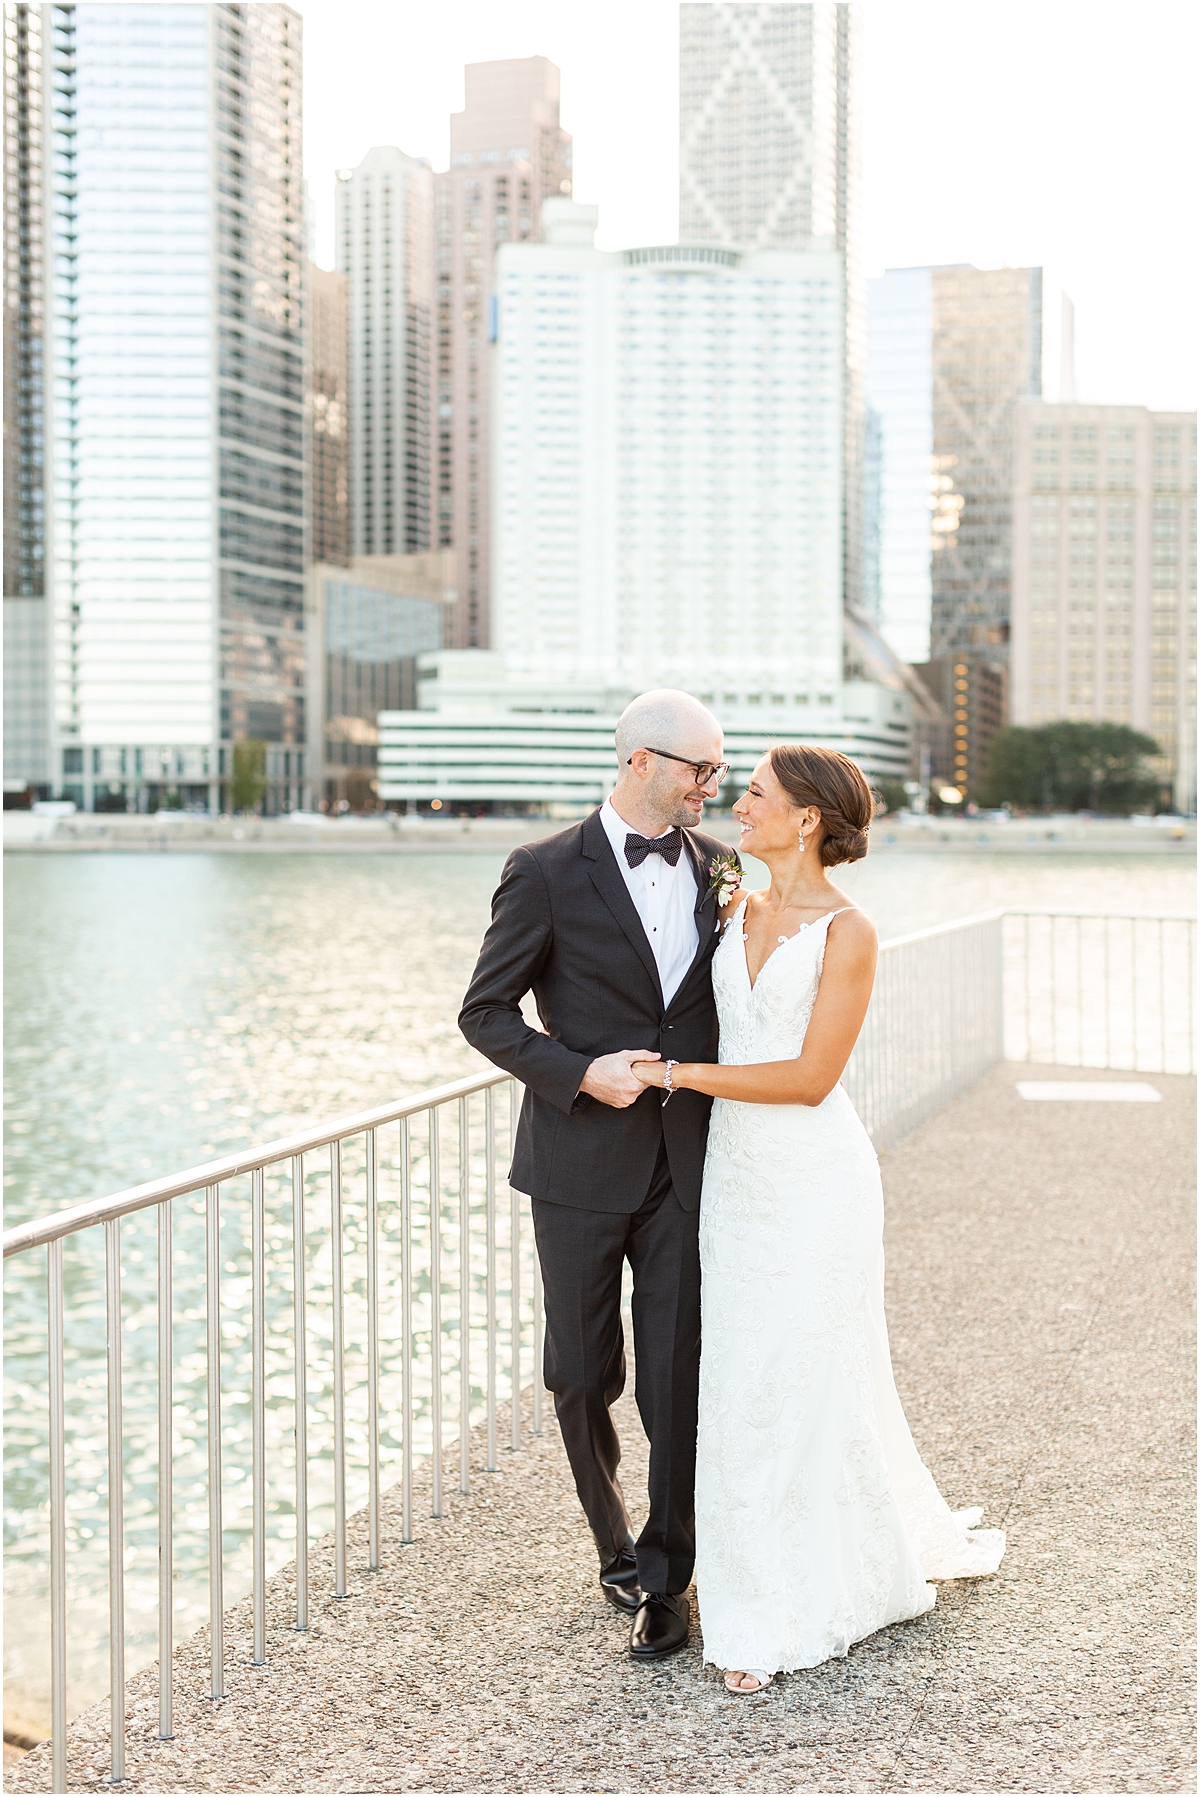 Wedding portraits at Olive Park in Chicago 